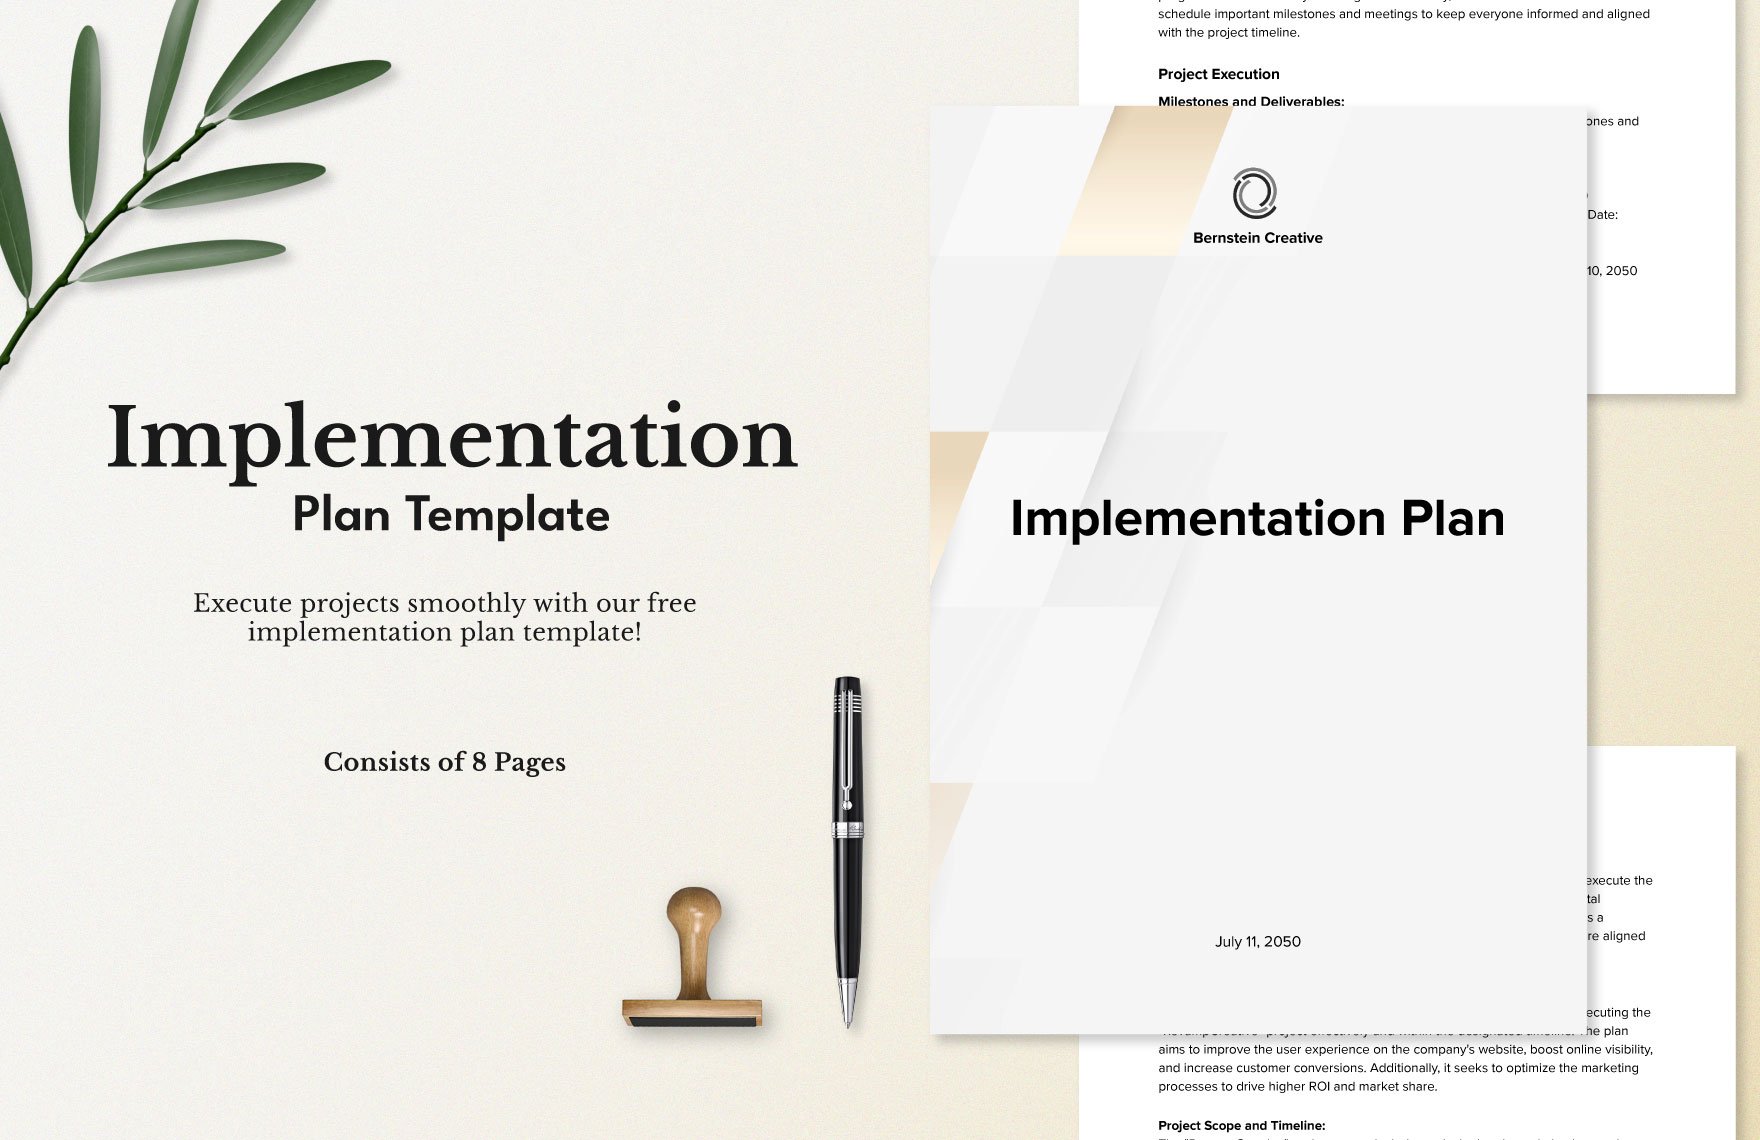 Implementation Plan Template in Word, Google Docs, PDF, Apple Pages